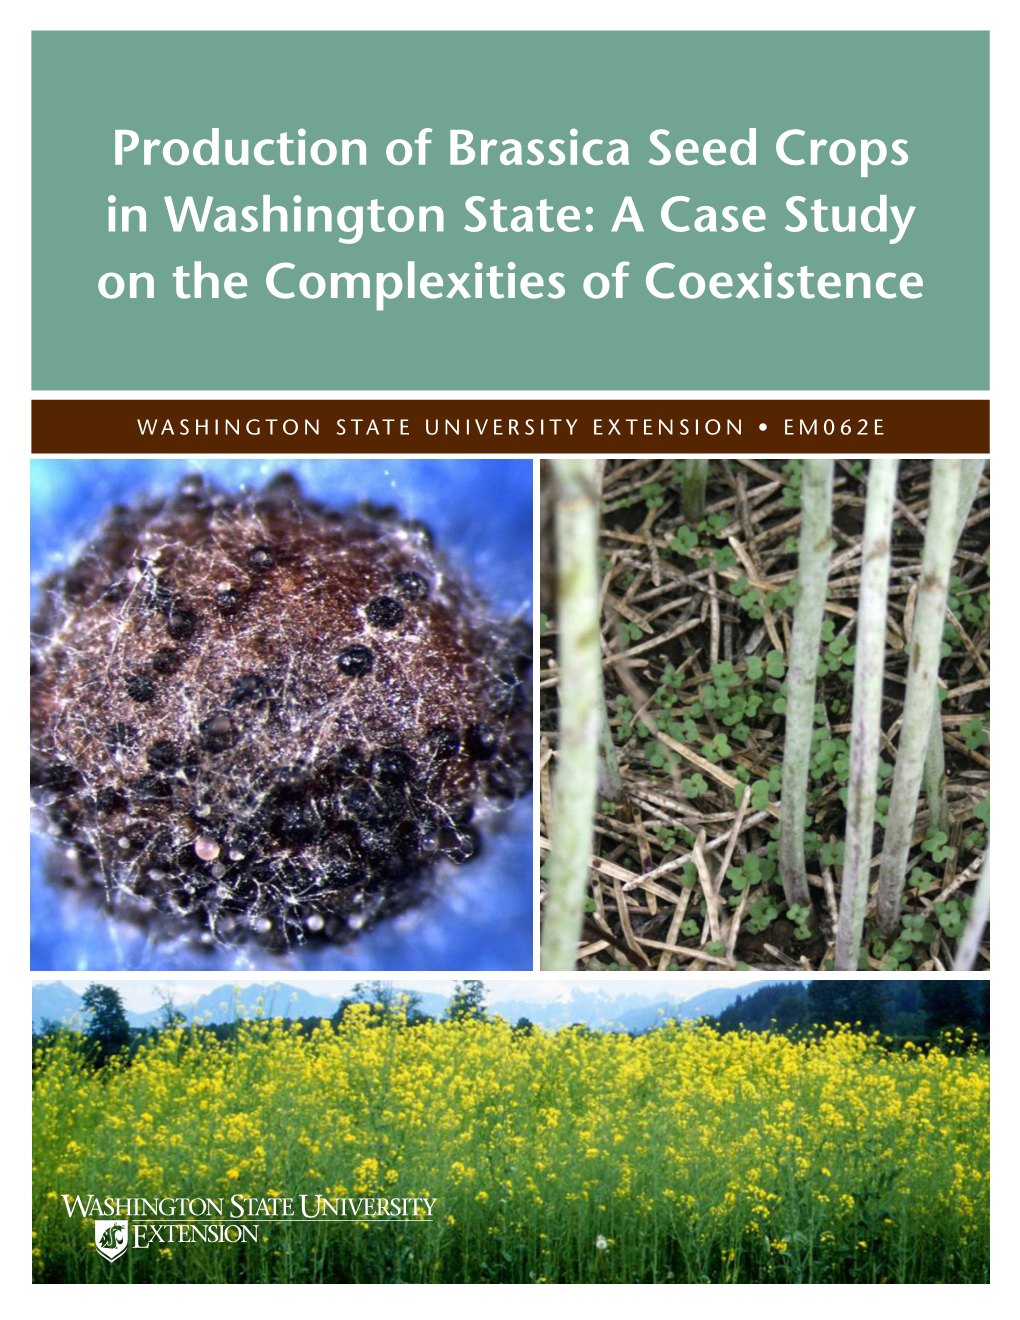 Production of Brassica Seed Crops in Washington State: a Case Study on the Complexities of Coexistence